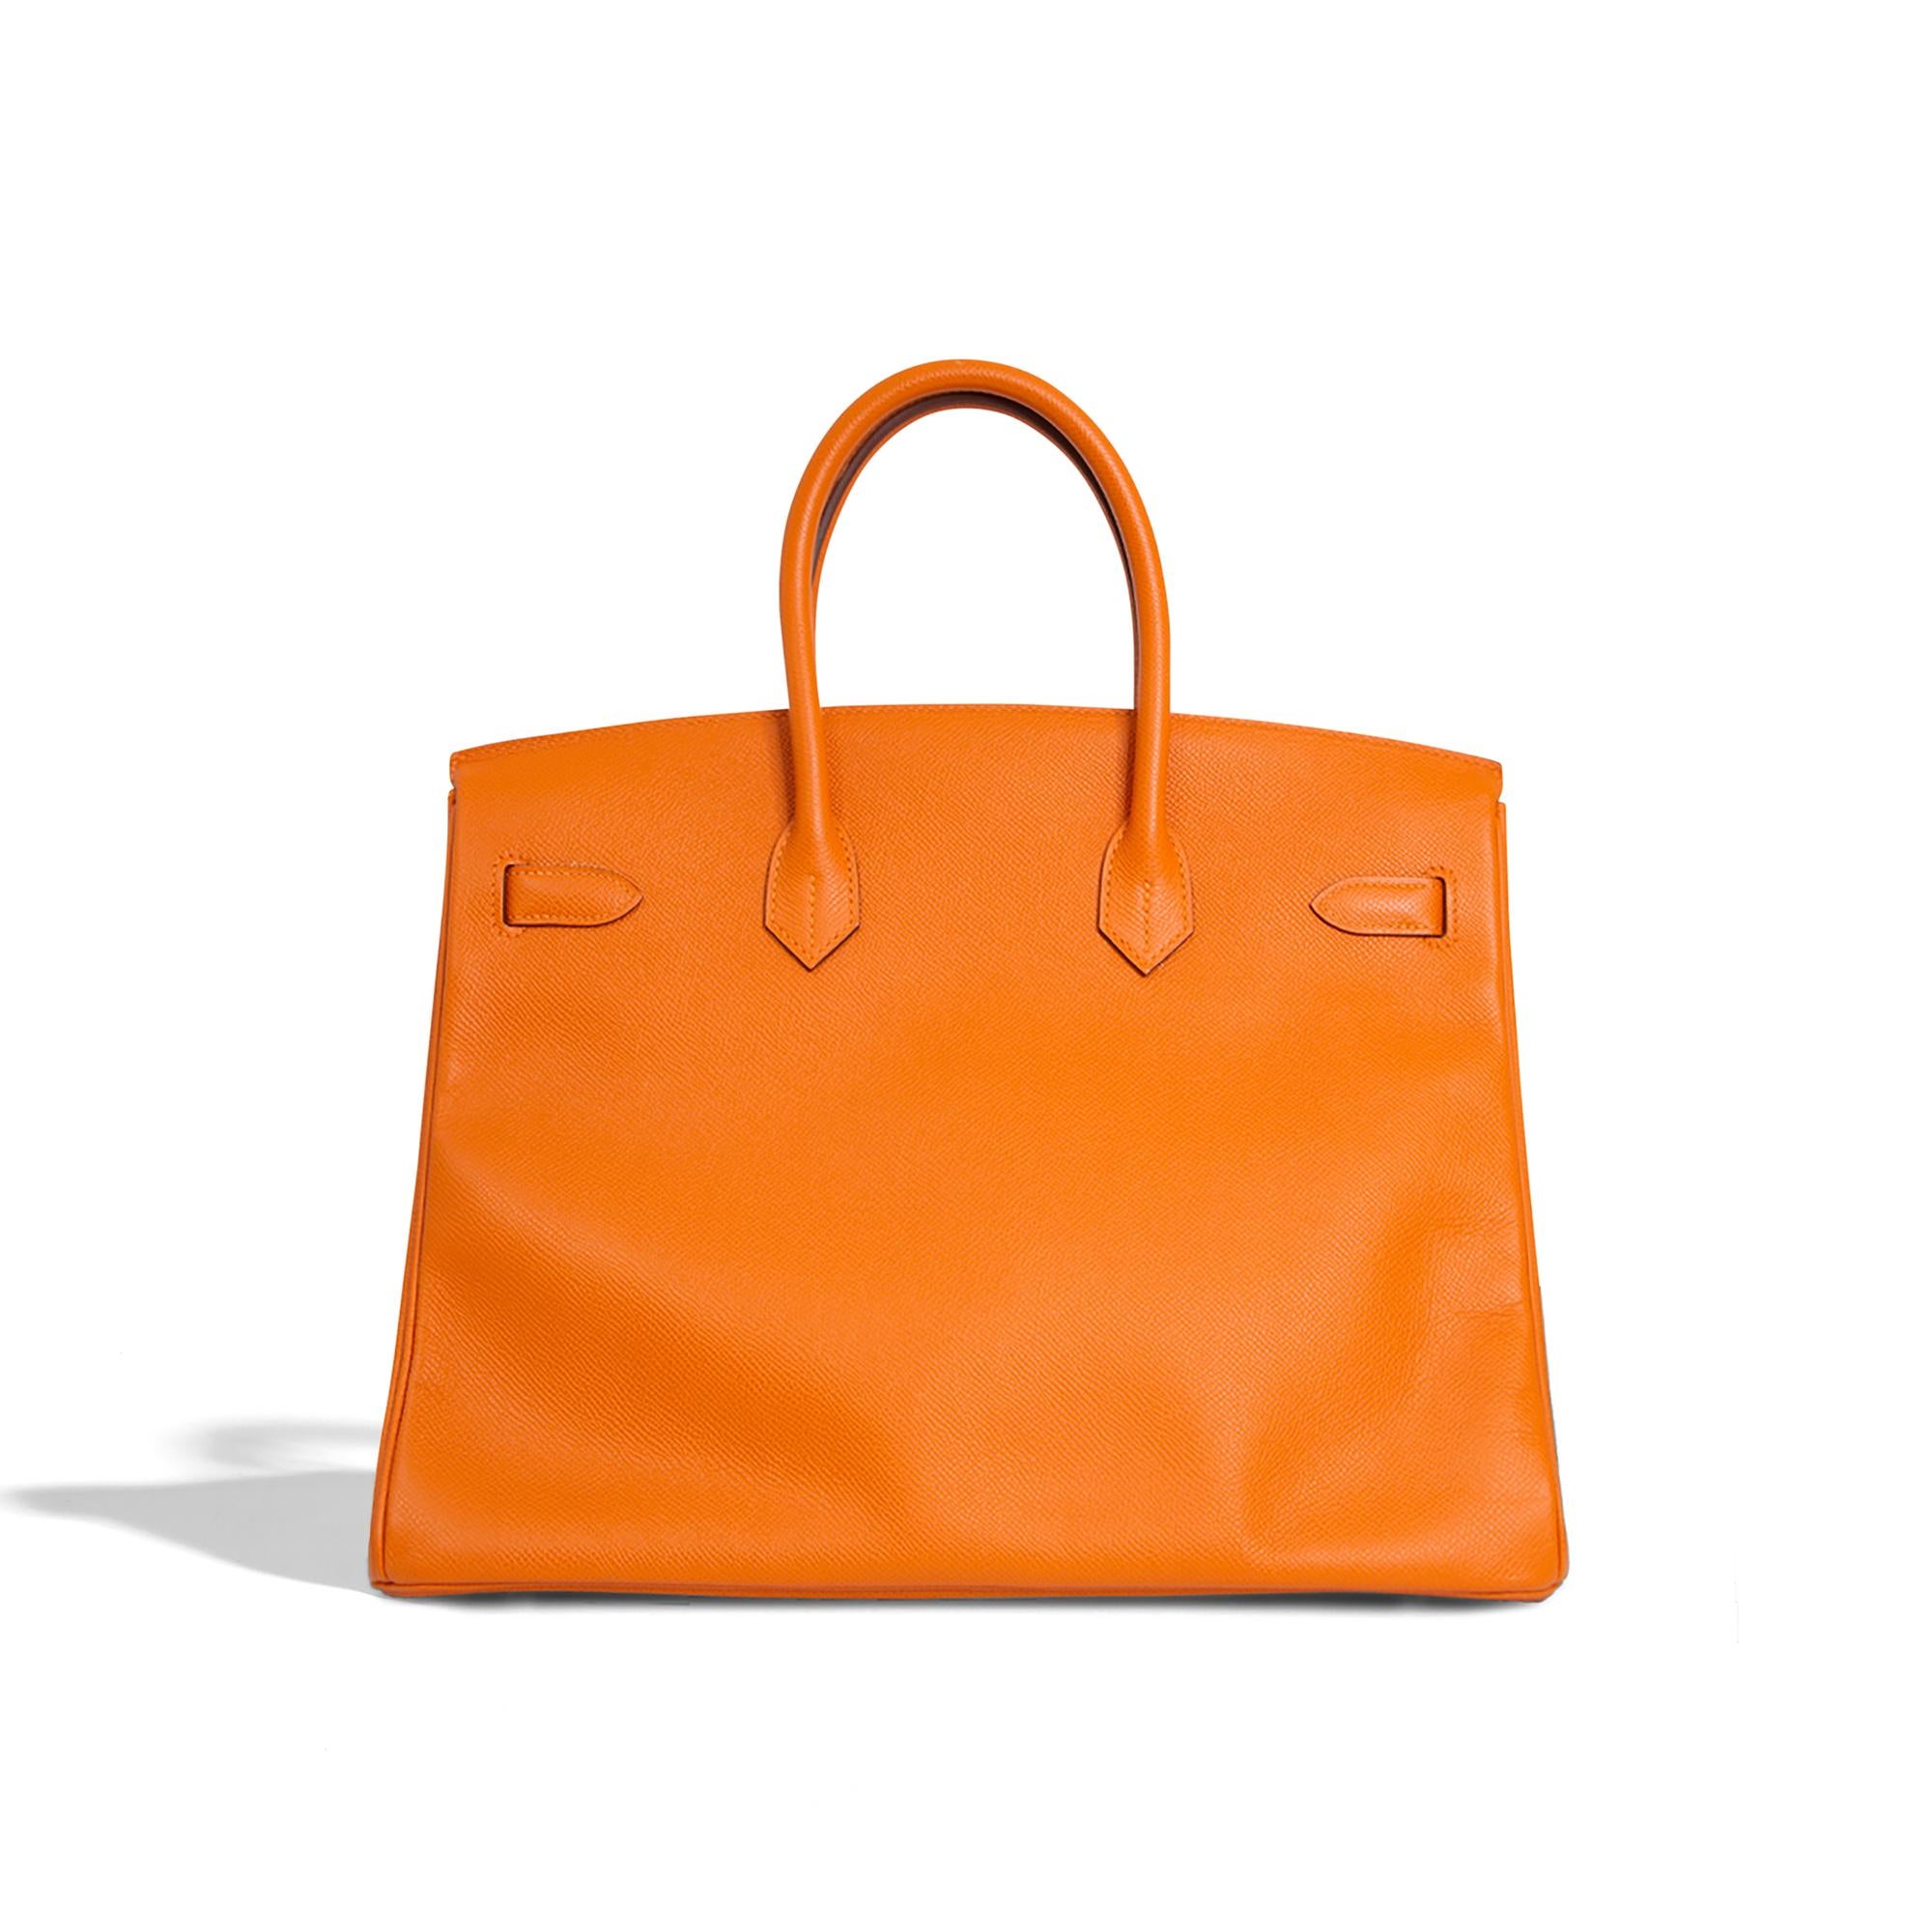 * Expertly crafted 35cm Hermes Birkin made from the durable and luxurious Epsom Leather in orange.
* Embellished with palladium hardware and has a zipped compartment inside to keep your most-used cards close at hand.
* Crafted in 2013.
* Very Good